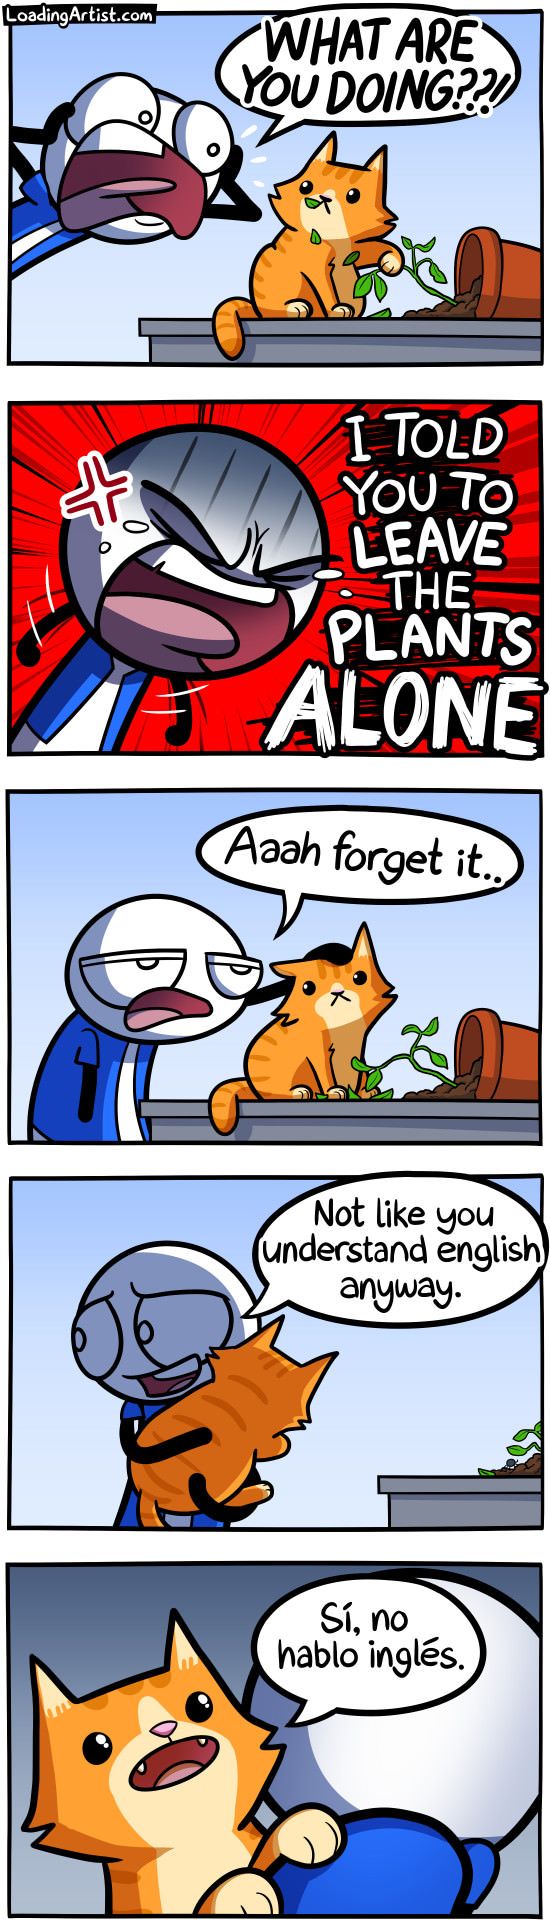 Leave the plants alone :)